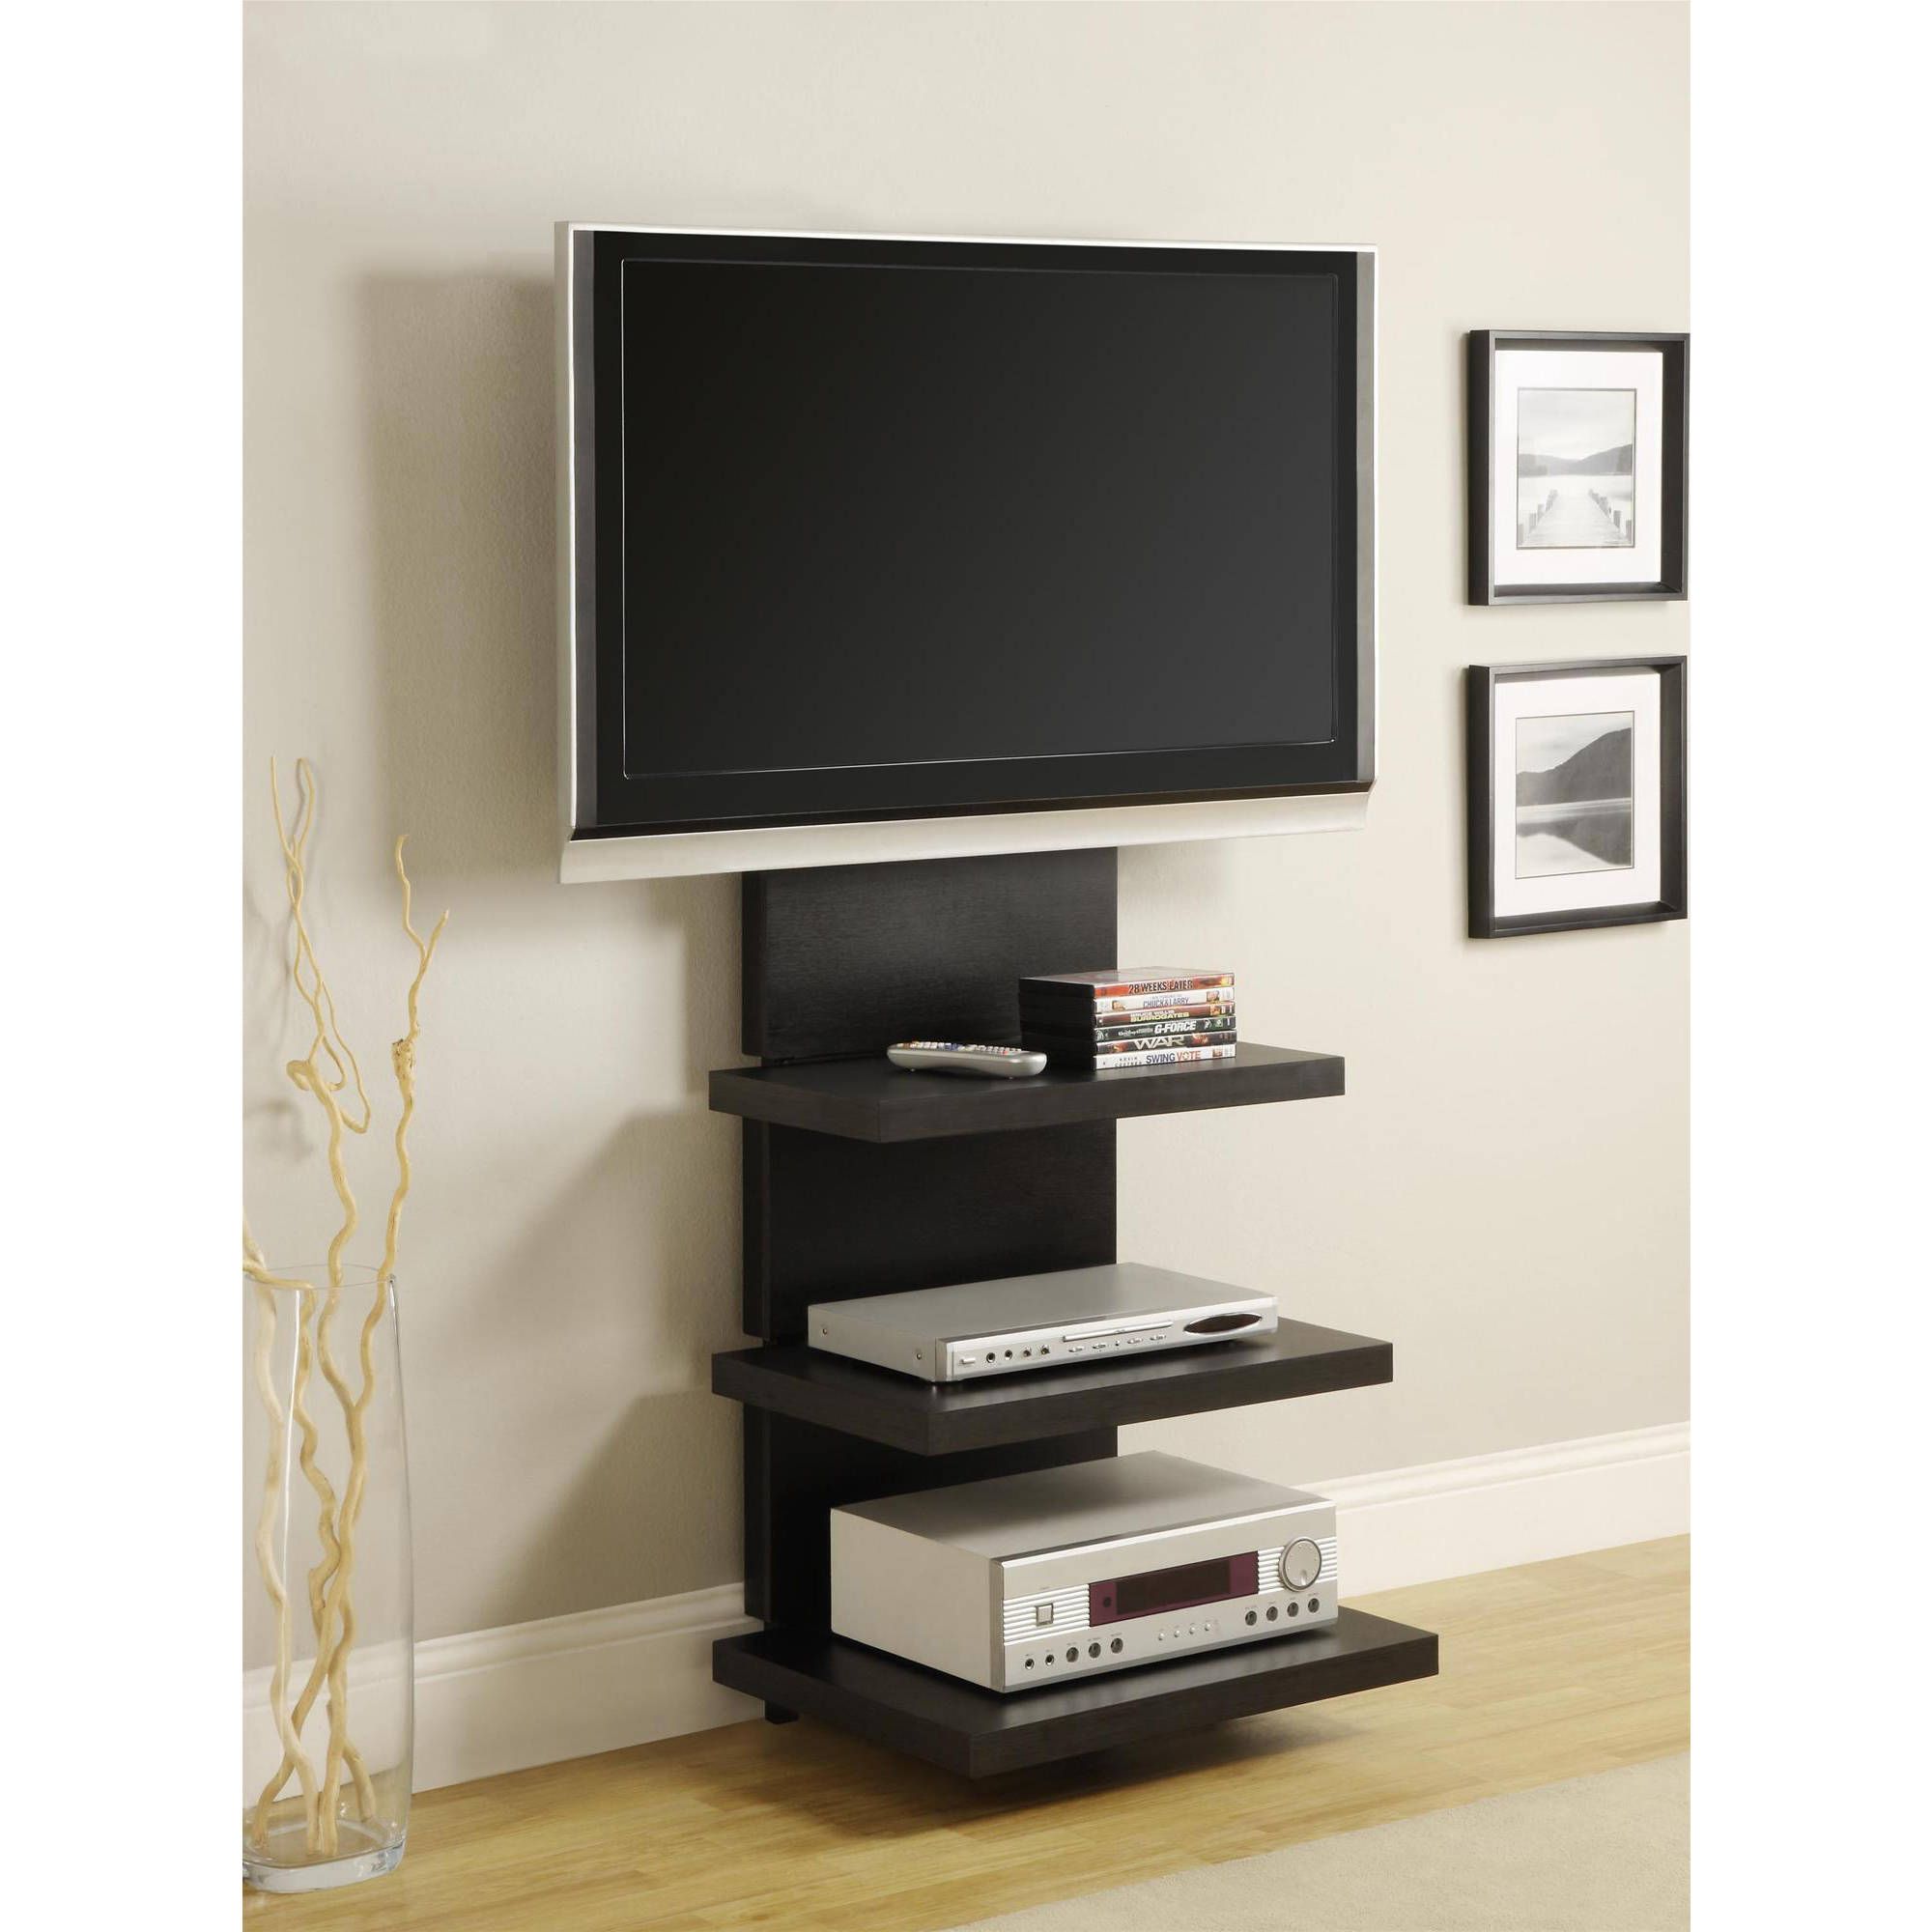 Ameriwood Home Elevation Altramount Tv Stand For Tvs Up To With Modern Floor Tv Stands With Swivel Metal Mount (View 9 of 15)